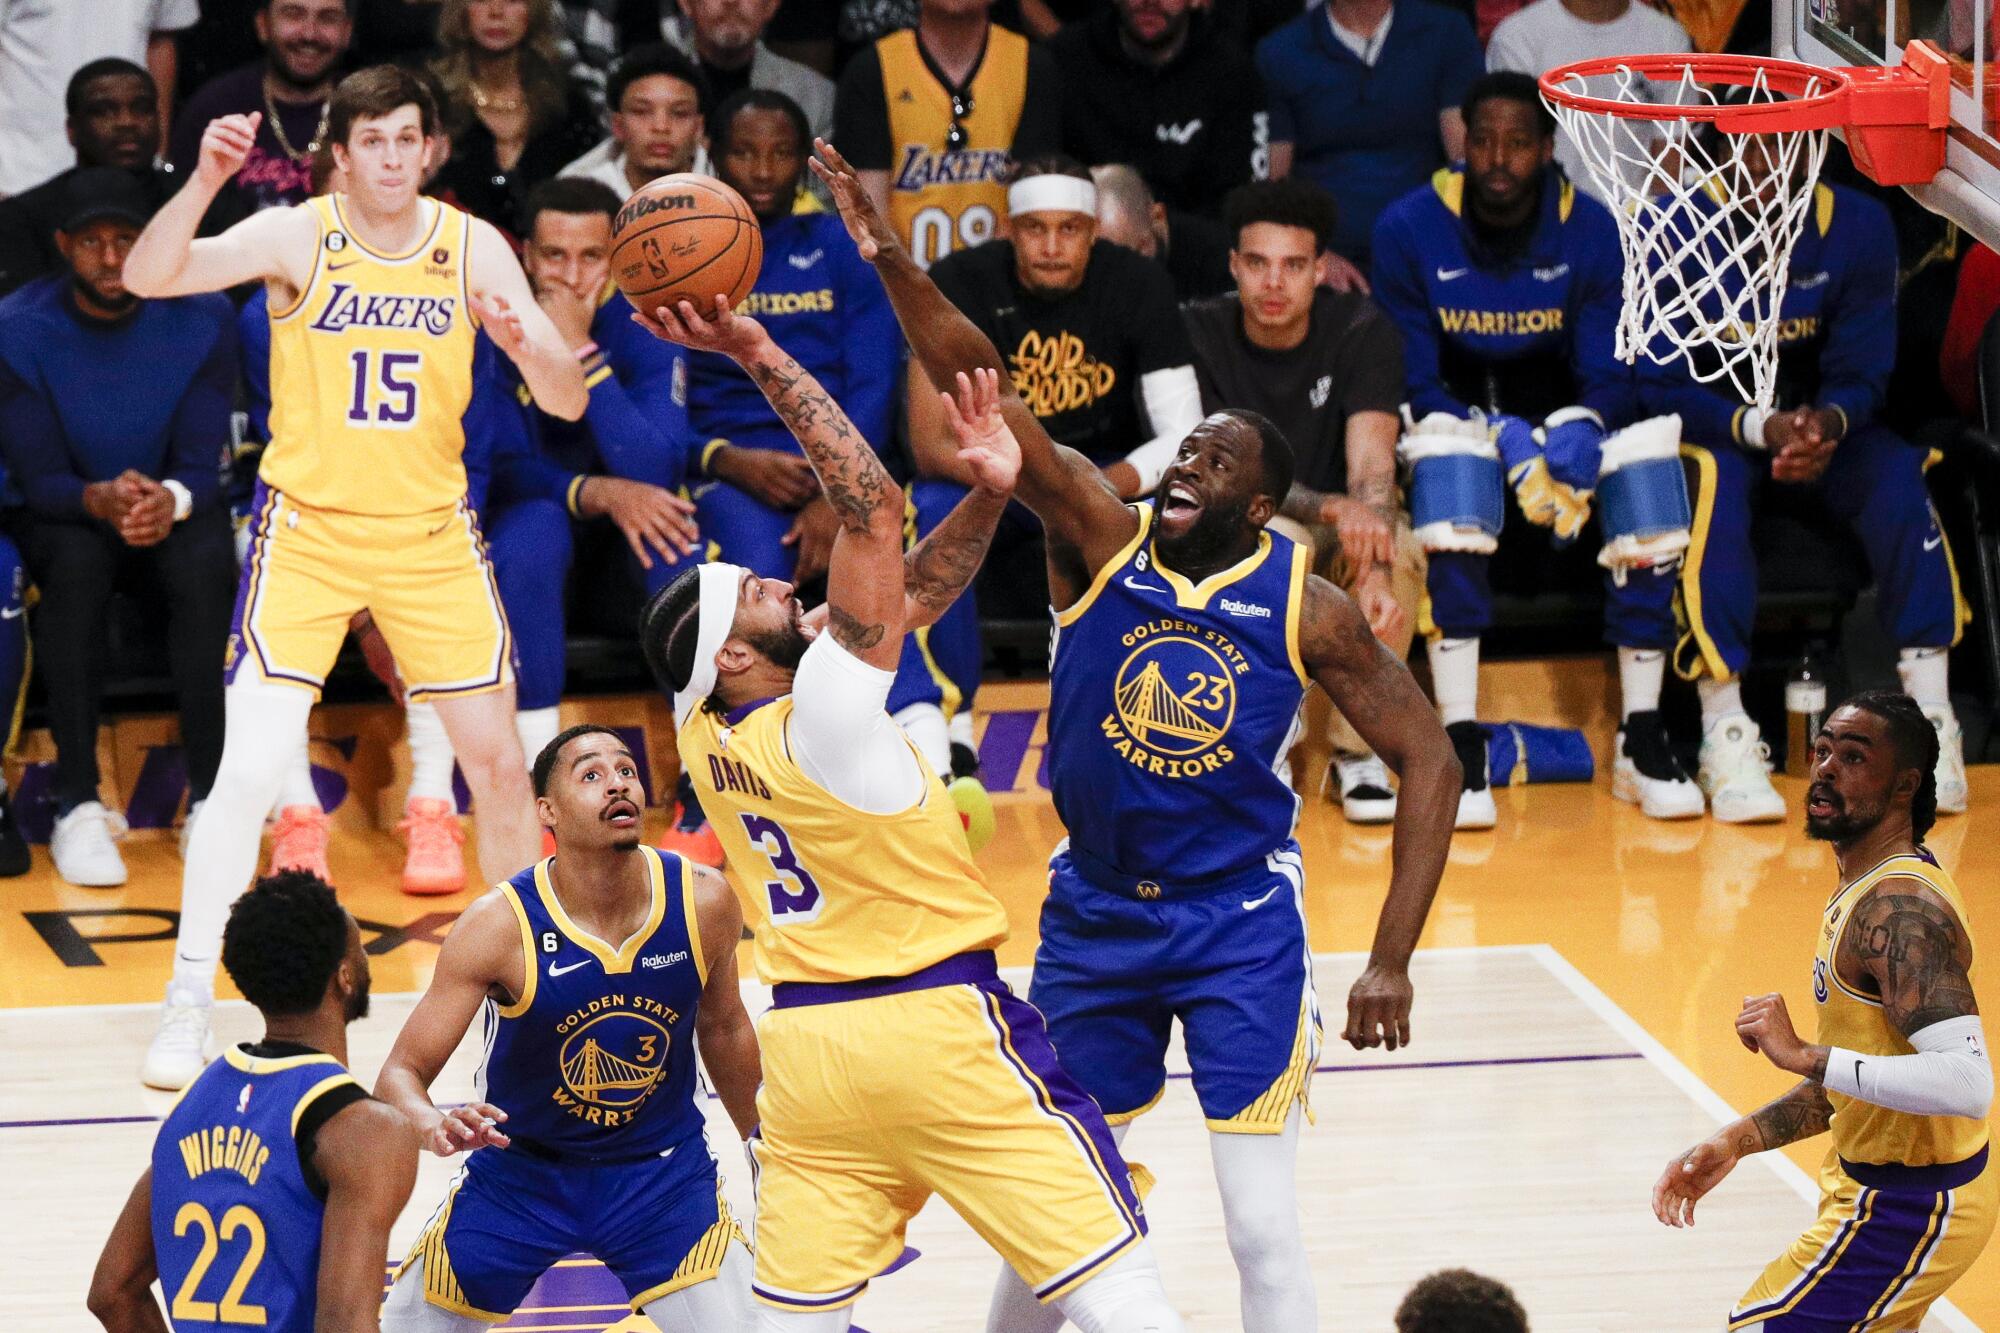 Lakers forward Anthony Davis is fouled by Golden State Warriors forward Draymond Green.